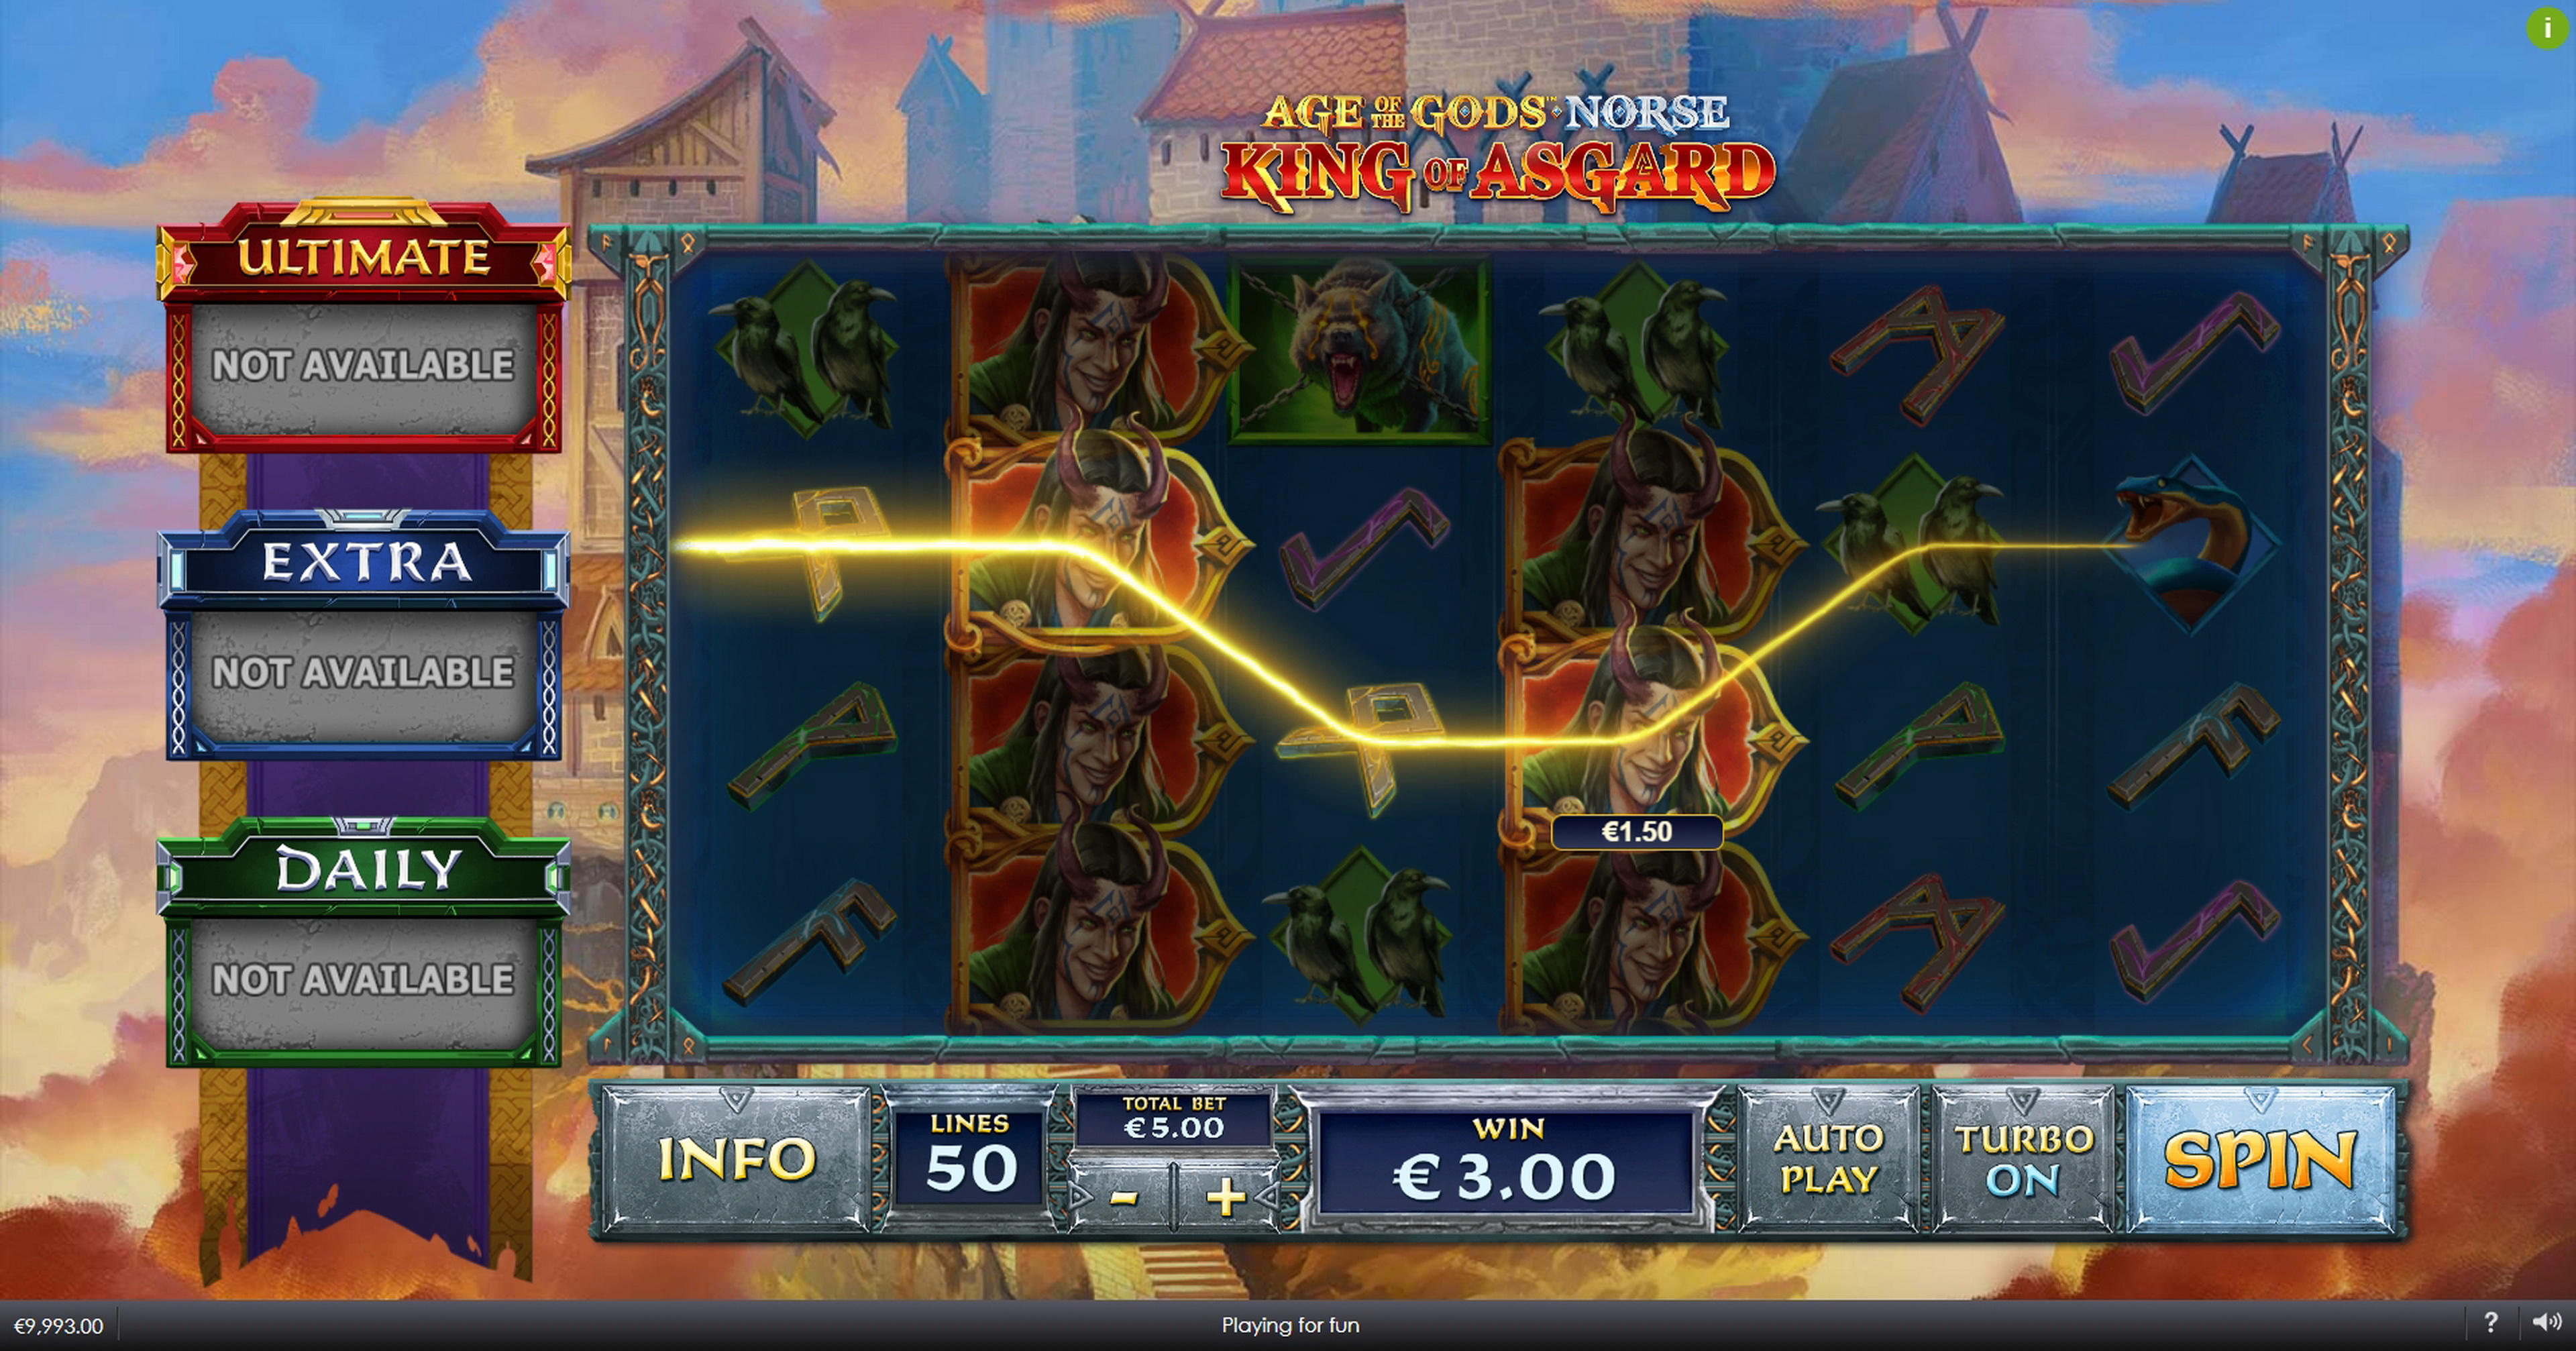 Win Money in Age of the Gods Norse King of Asgard Free Slot Game by Ash Gaming